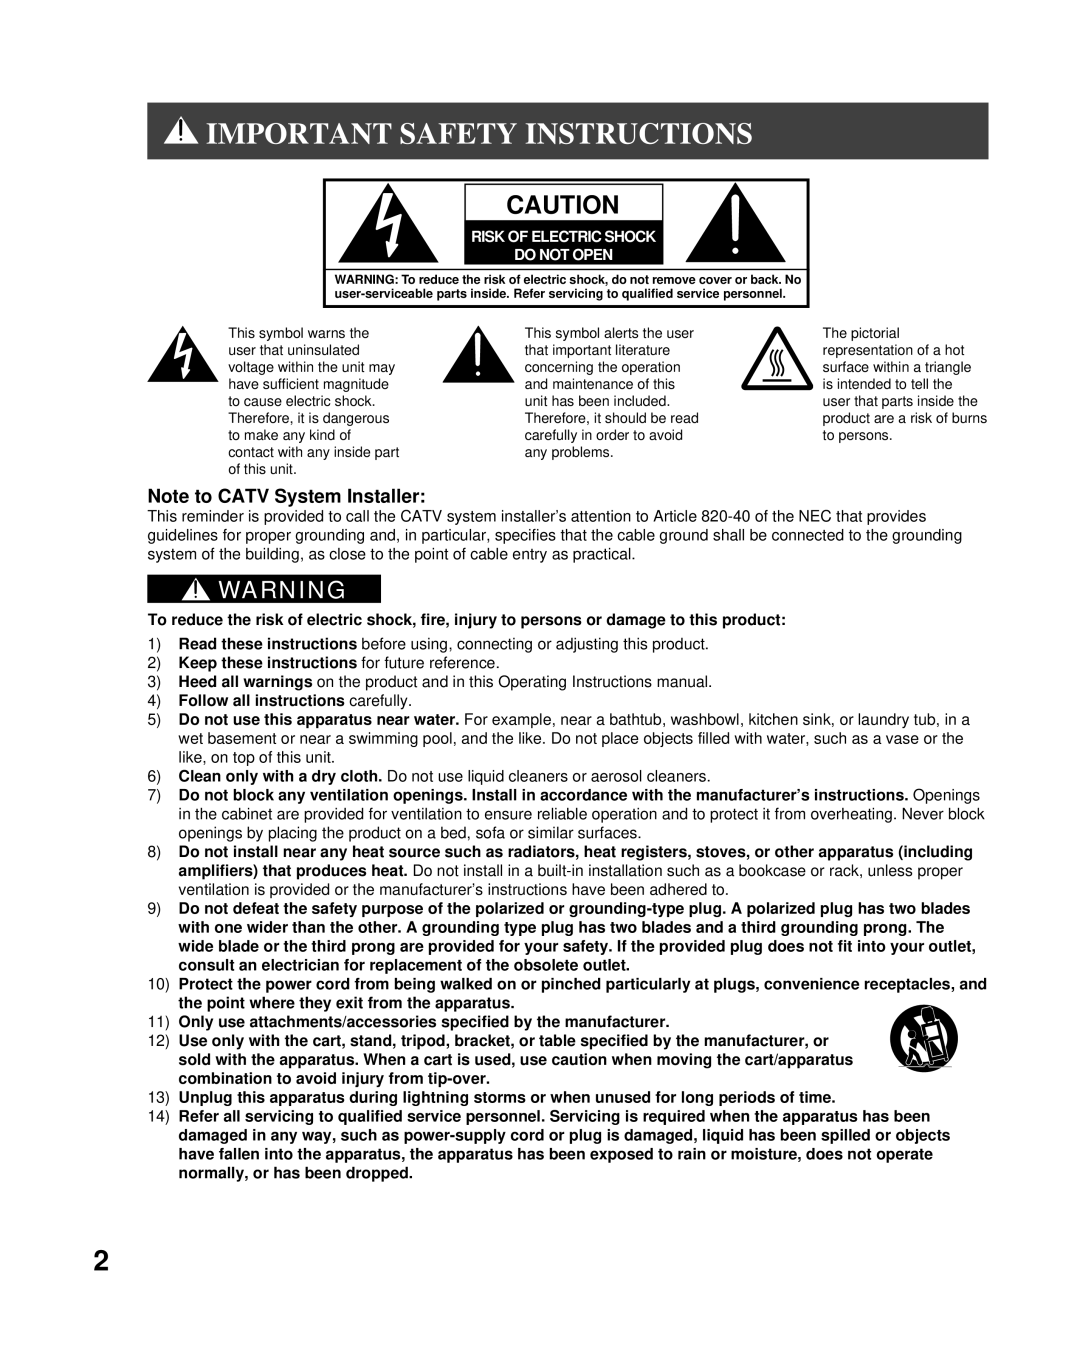 Panasonic PT-50LCZ70 Important Safety Instructions, Note to CATV System Installer, Risk Of Electric Shock Do Not Open 